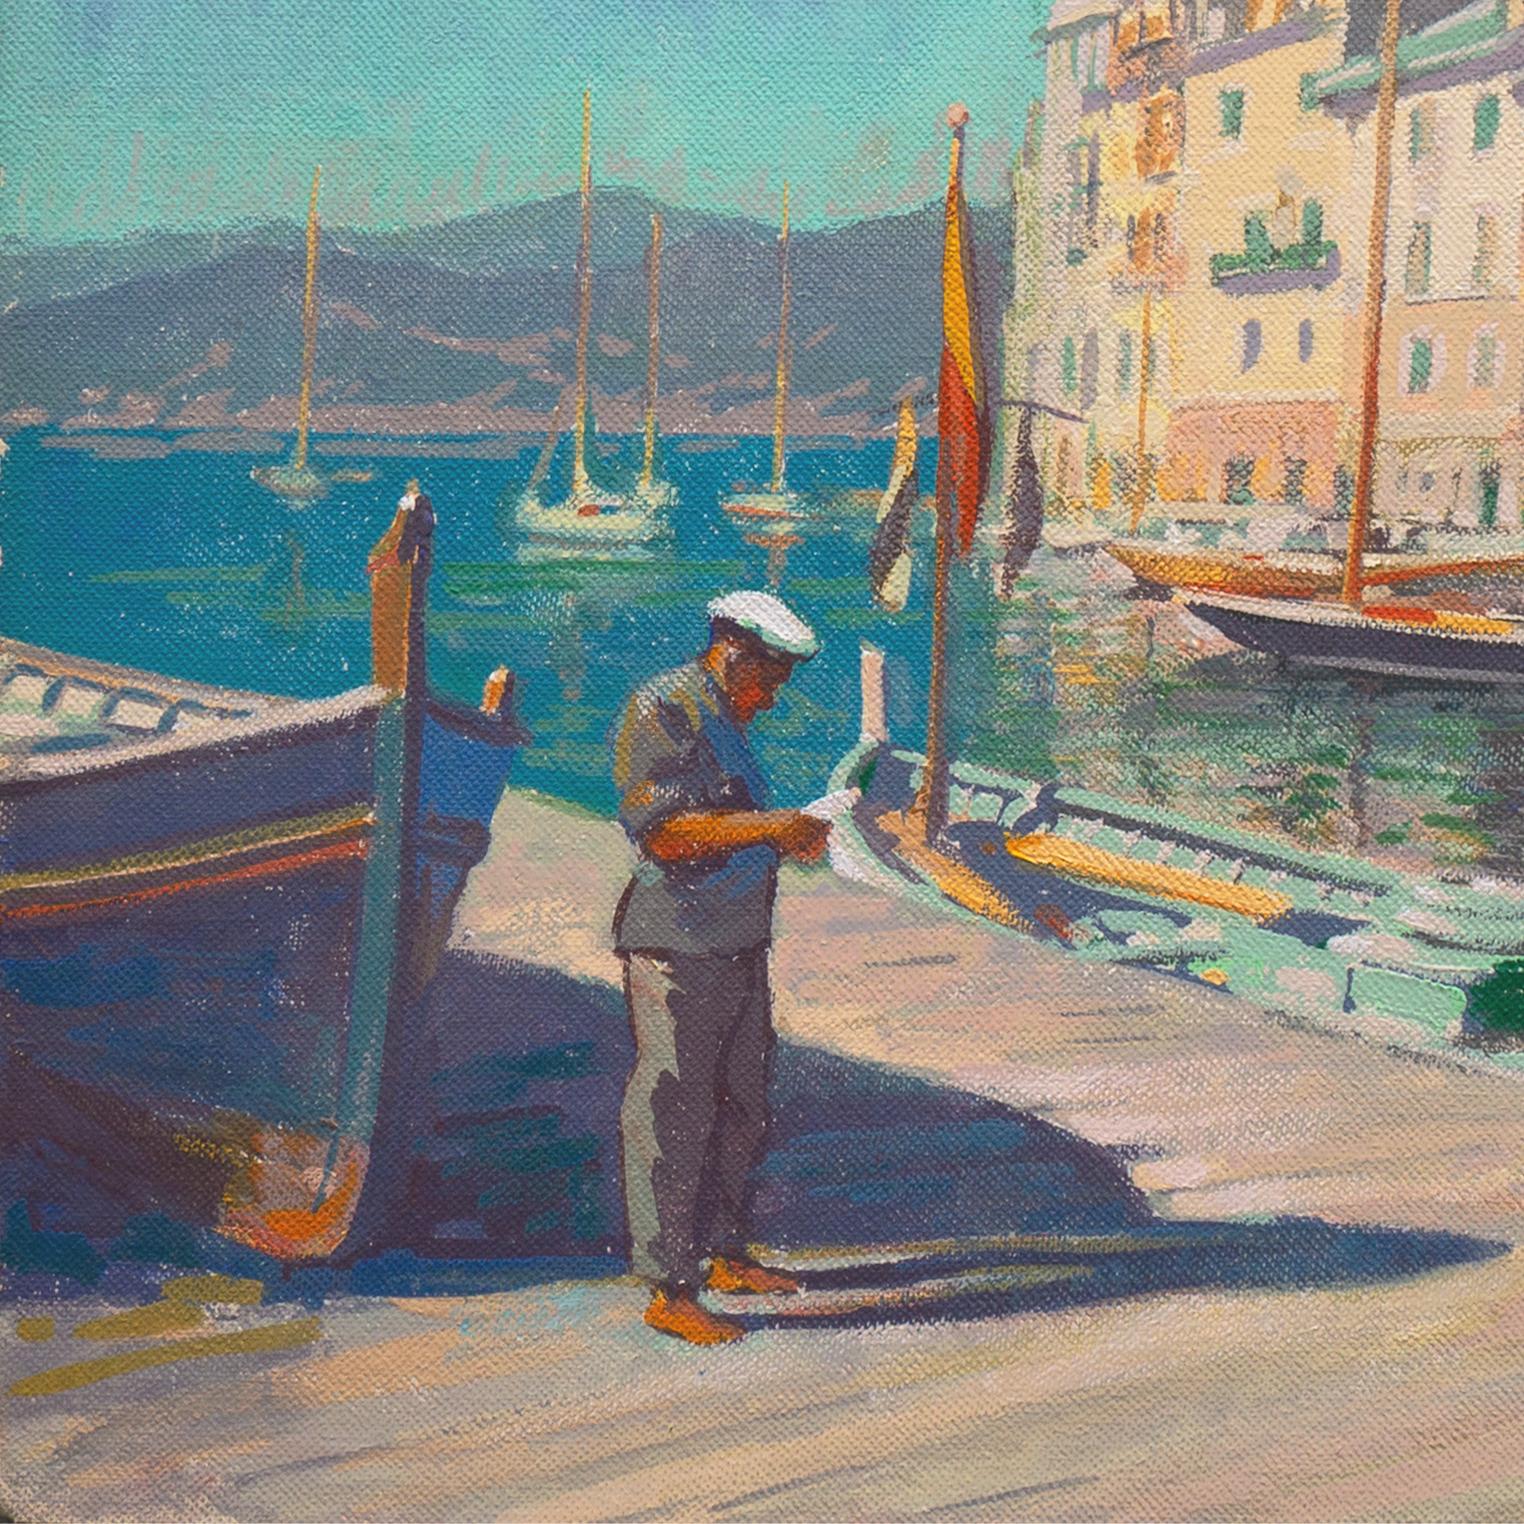 Signed lower right, 'Epperly' for Richard Ruh Epperly (American, 1891-1973) and dated 1957. Artist label from original frame, verso, bearing title, 'Sunny Italy'.

American painter and illustrator, Richard Ruh Epperly was born in Tallula, Menard